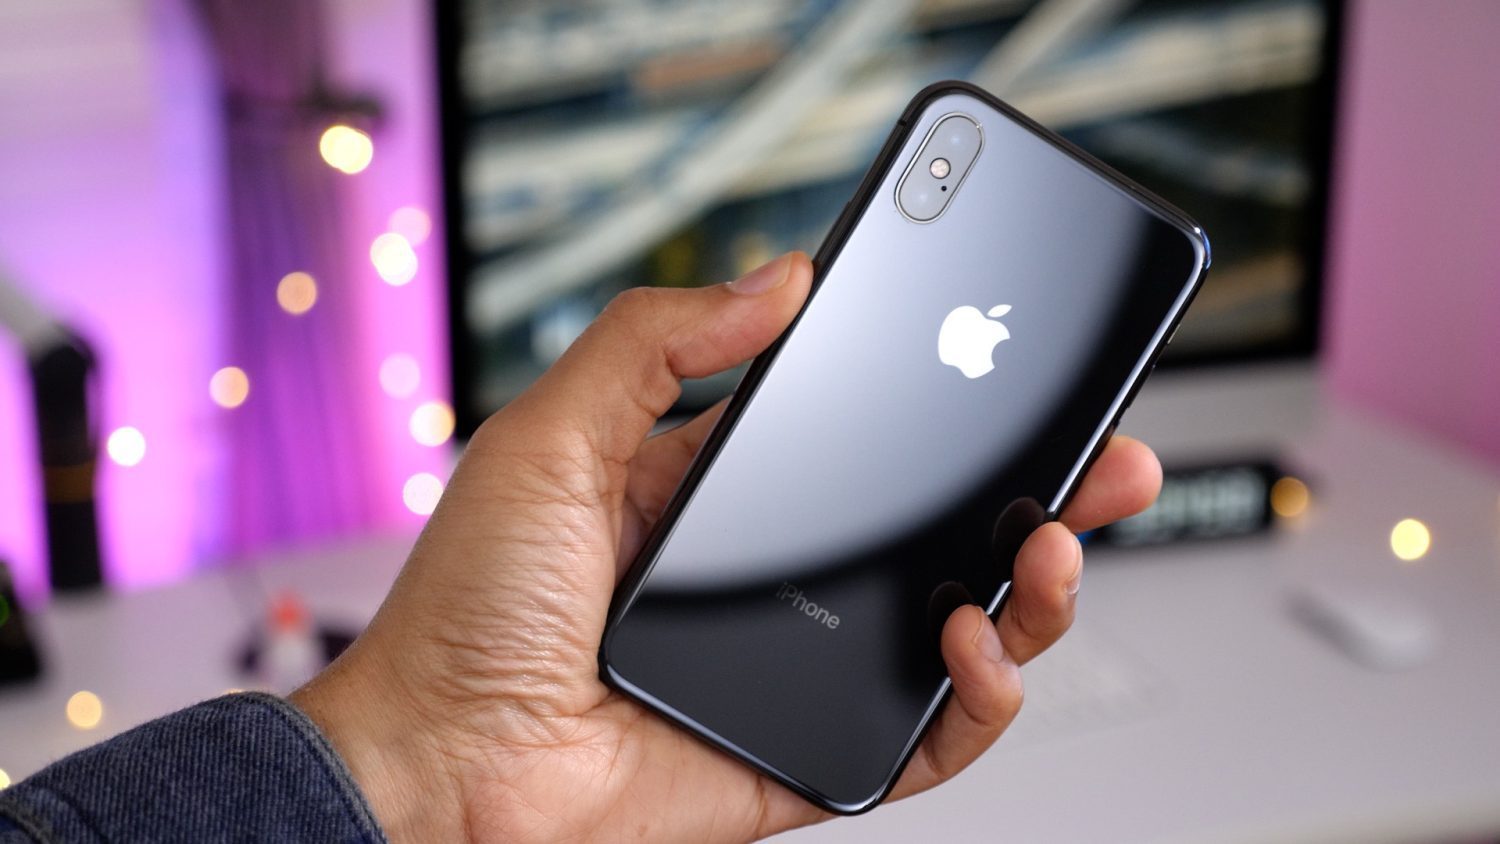 How to jailbreak iPhone with iOS 13.5 in under five minutes (video)